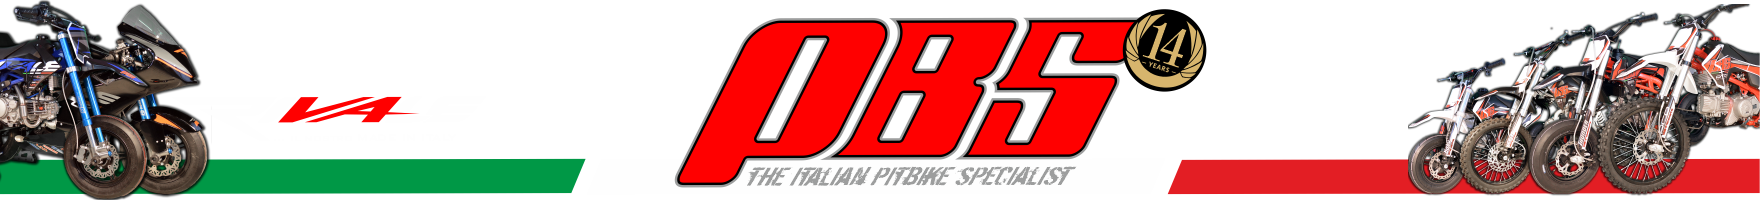 PBS Pitbike - The Italian Pitbike Specialist - Pitbikeshop